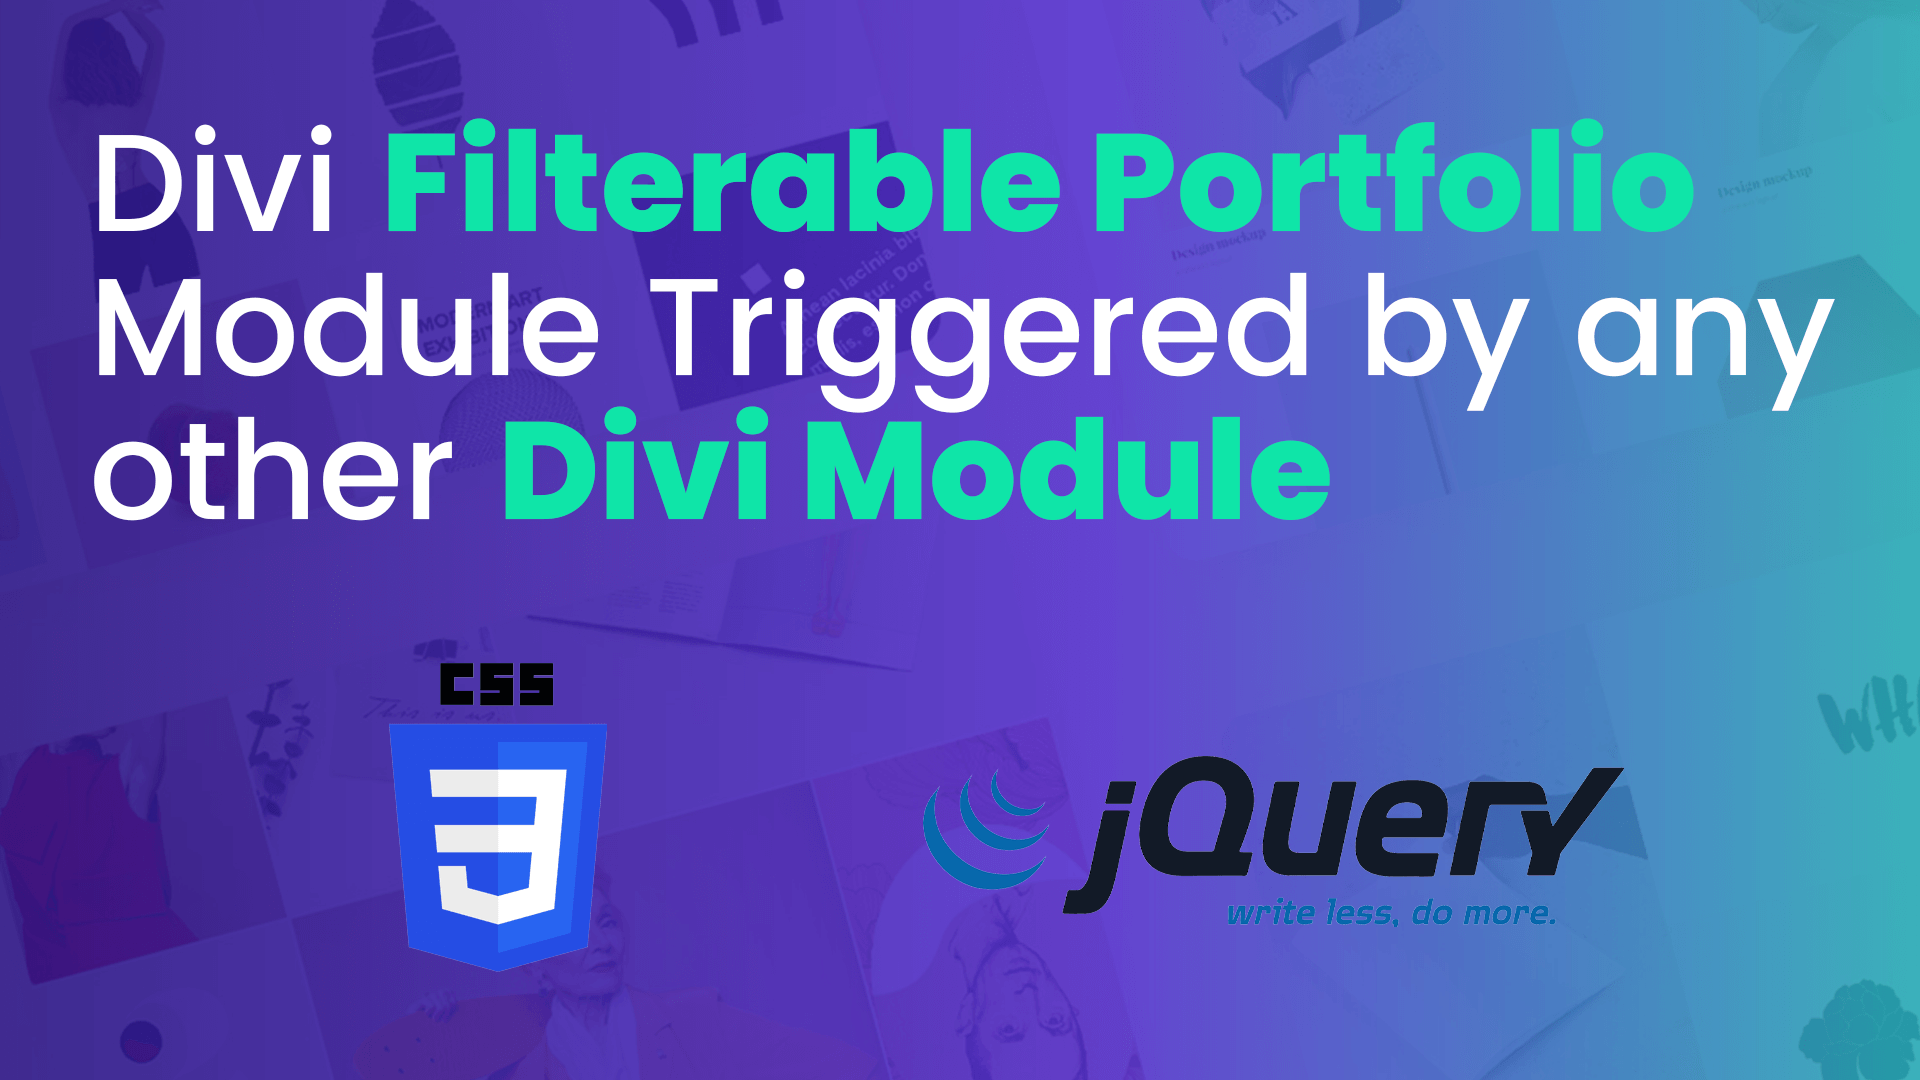 How to Add a Filtered Portfolio Triggered by any Divi Module